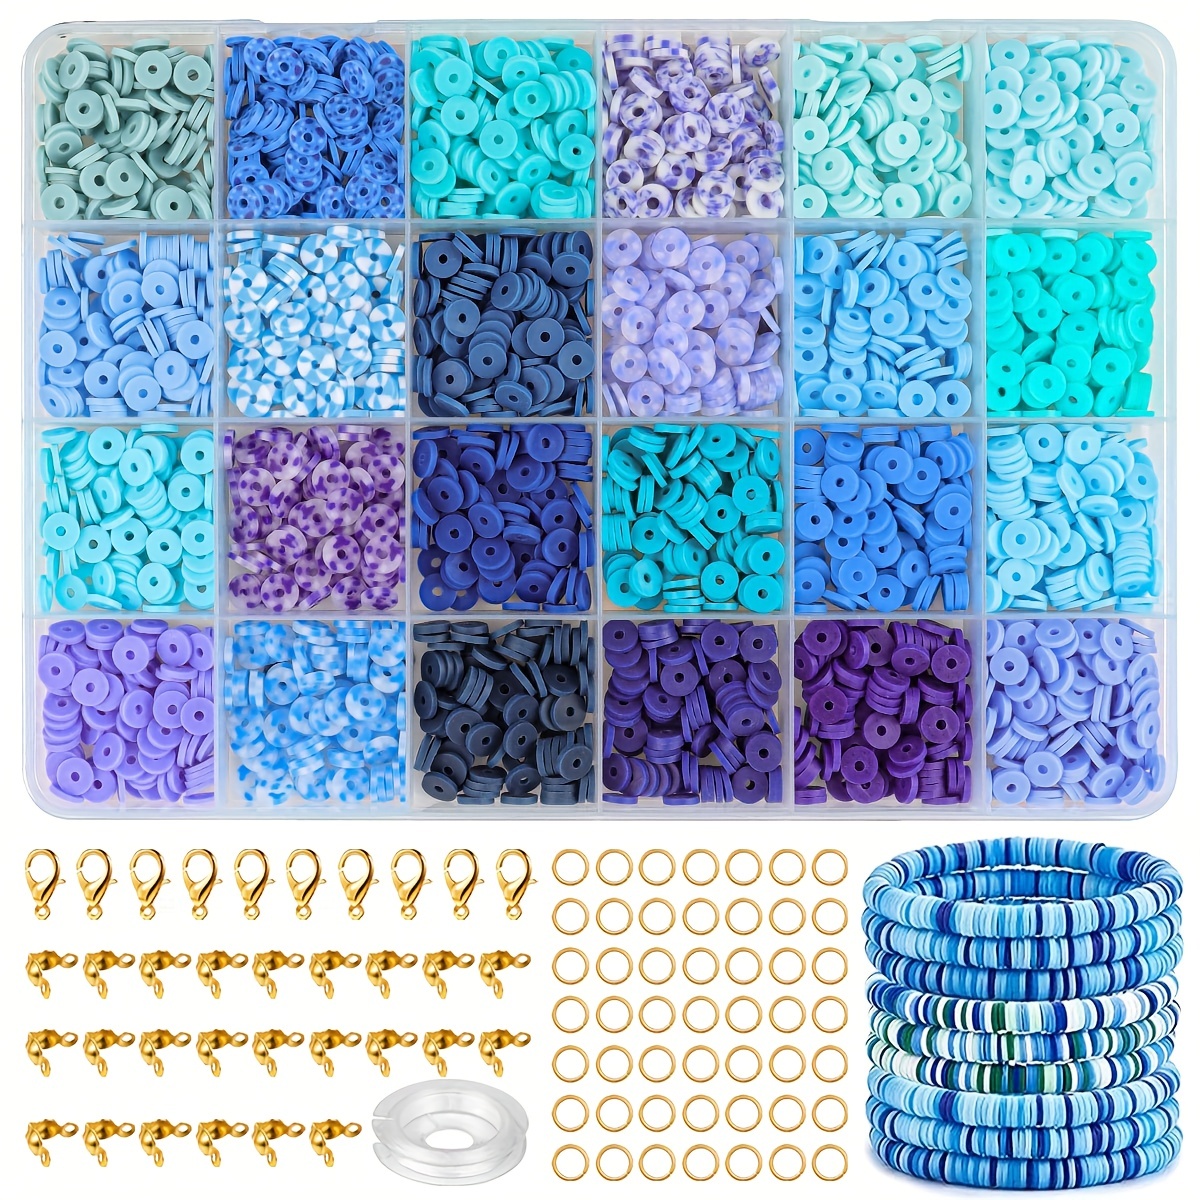 Clay Beads Bracelet Making Kit With Mermaid Beads, Flat Round Polymer Clay  Beads Jewelry Making Kit For Teens Girls 8-18 With Charms And Elastic